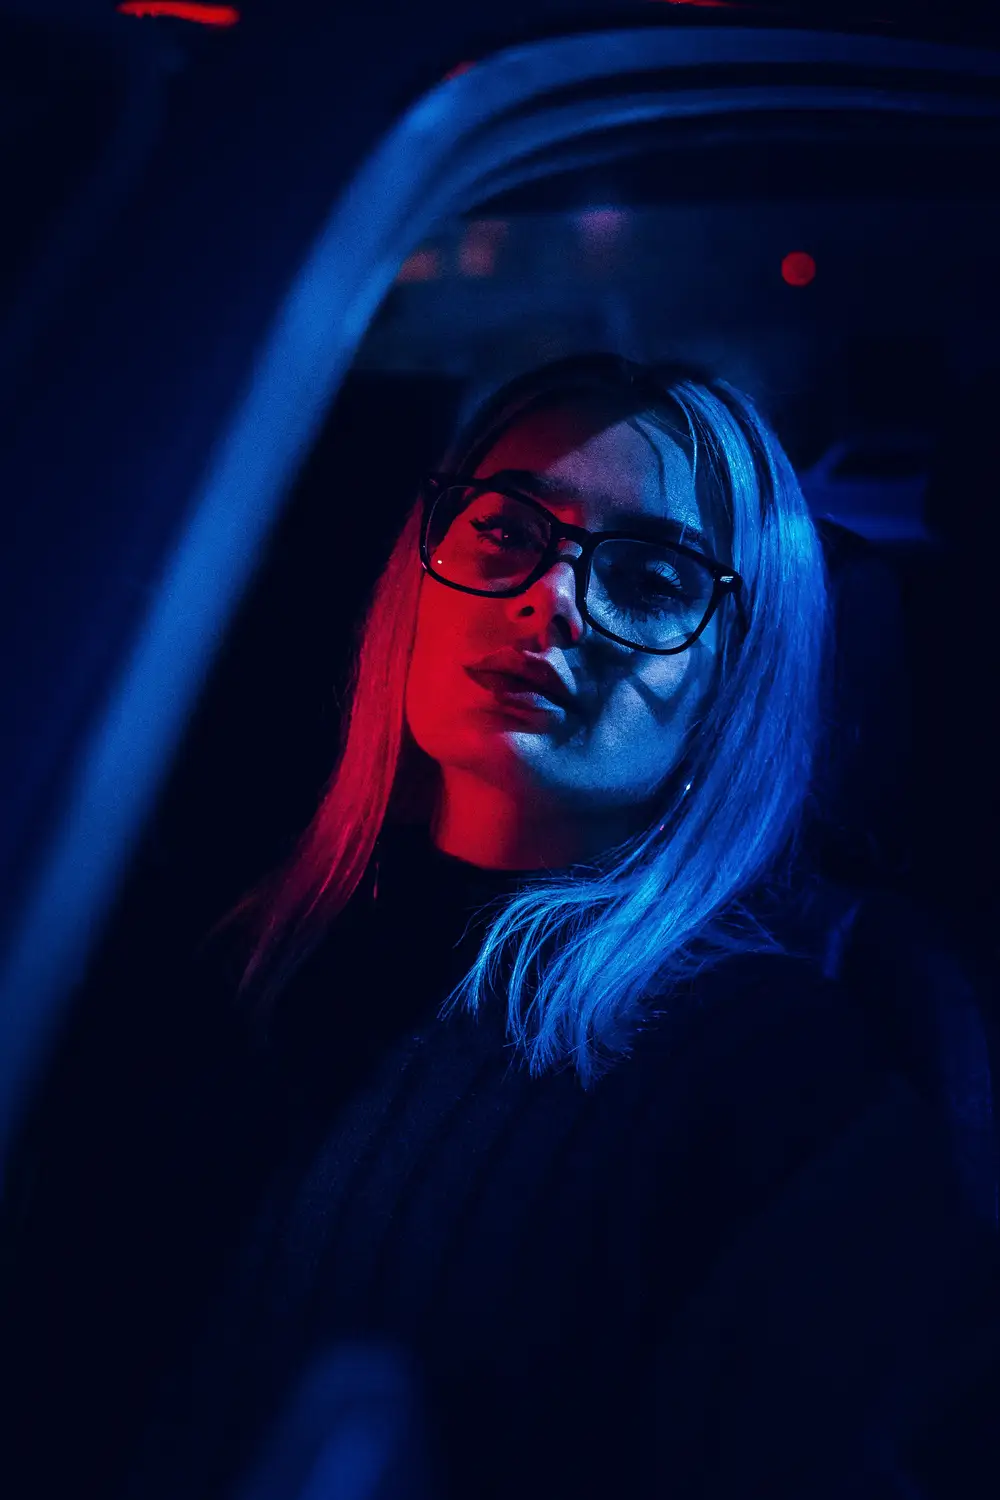 Portrait of a lady in red and blue neon light